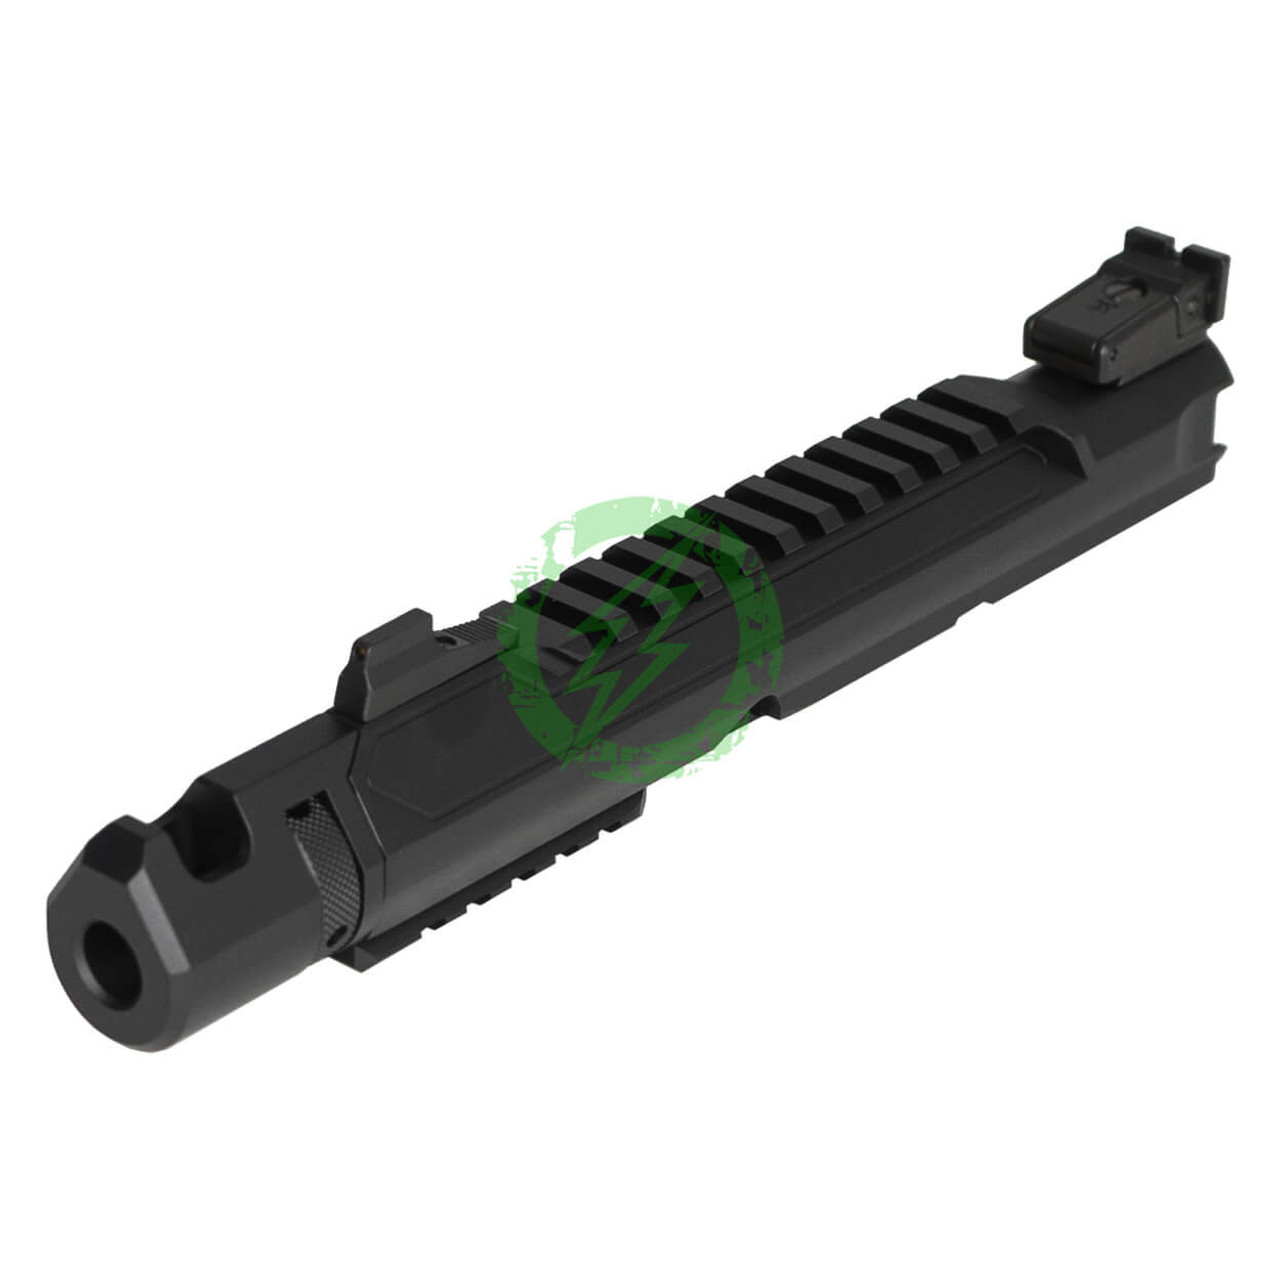  Action Army AAP-01 Upper Receiver Kit 